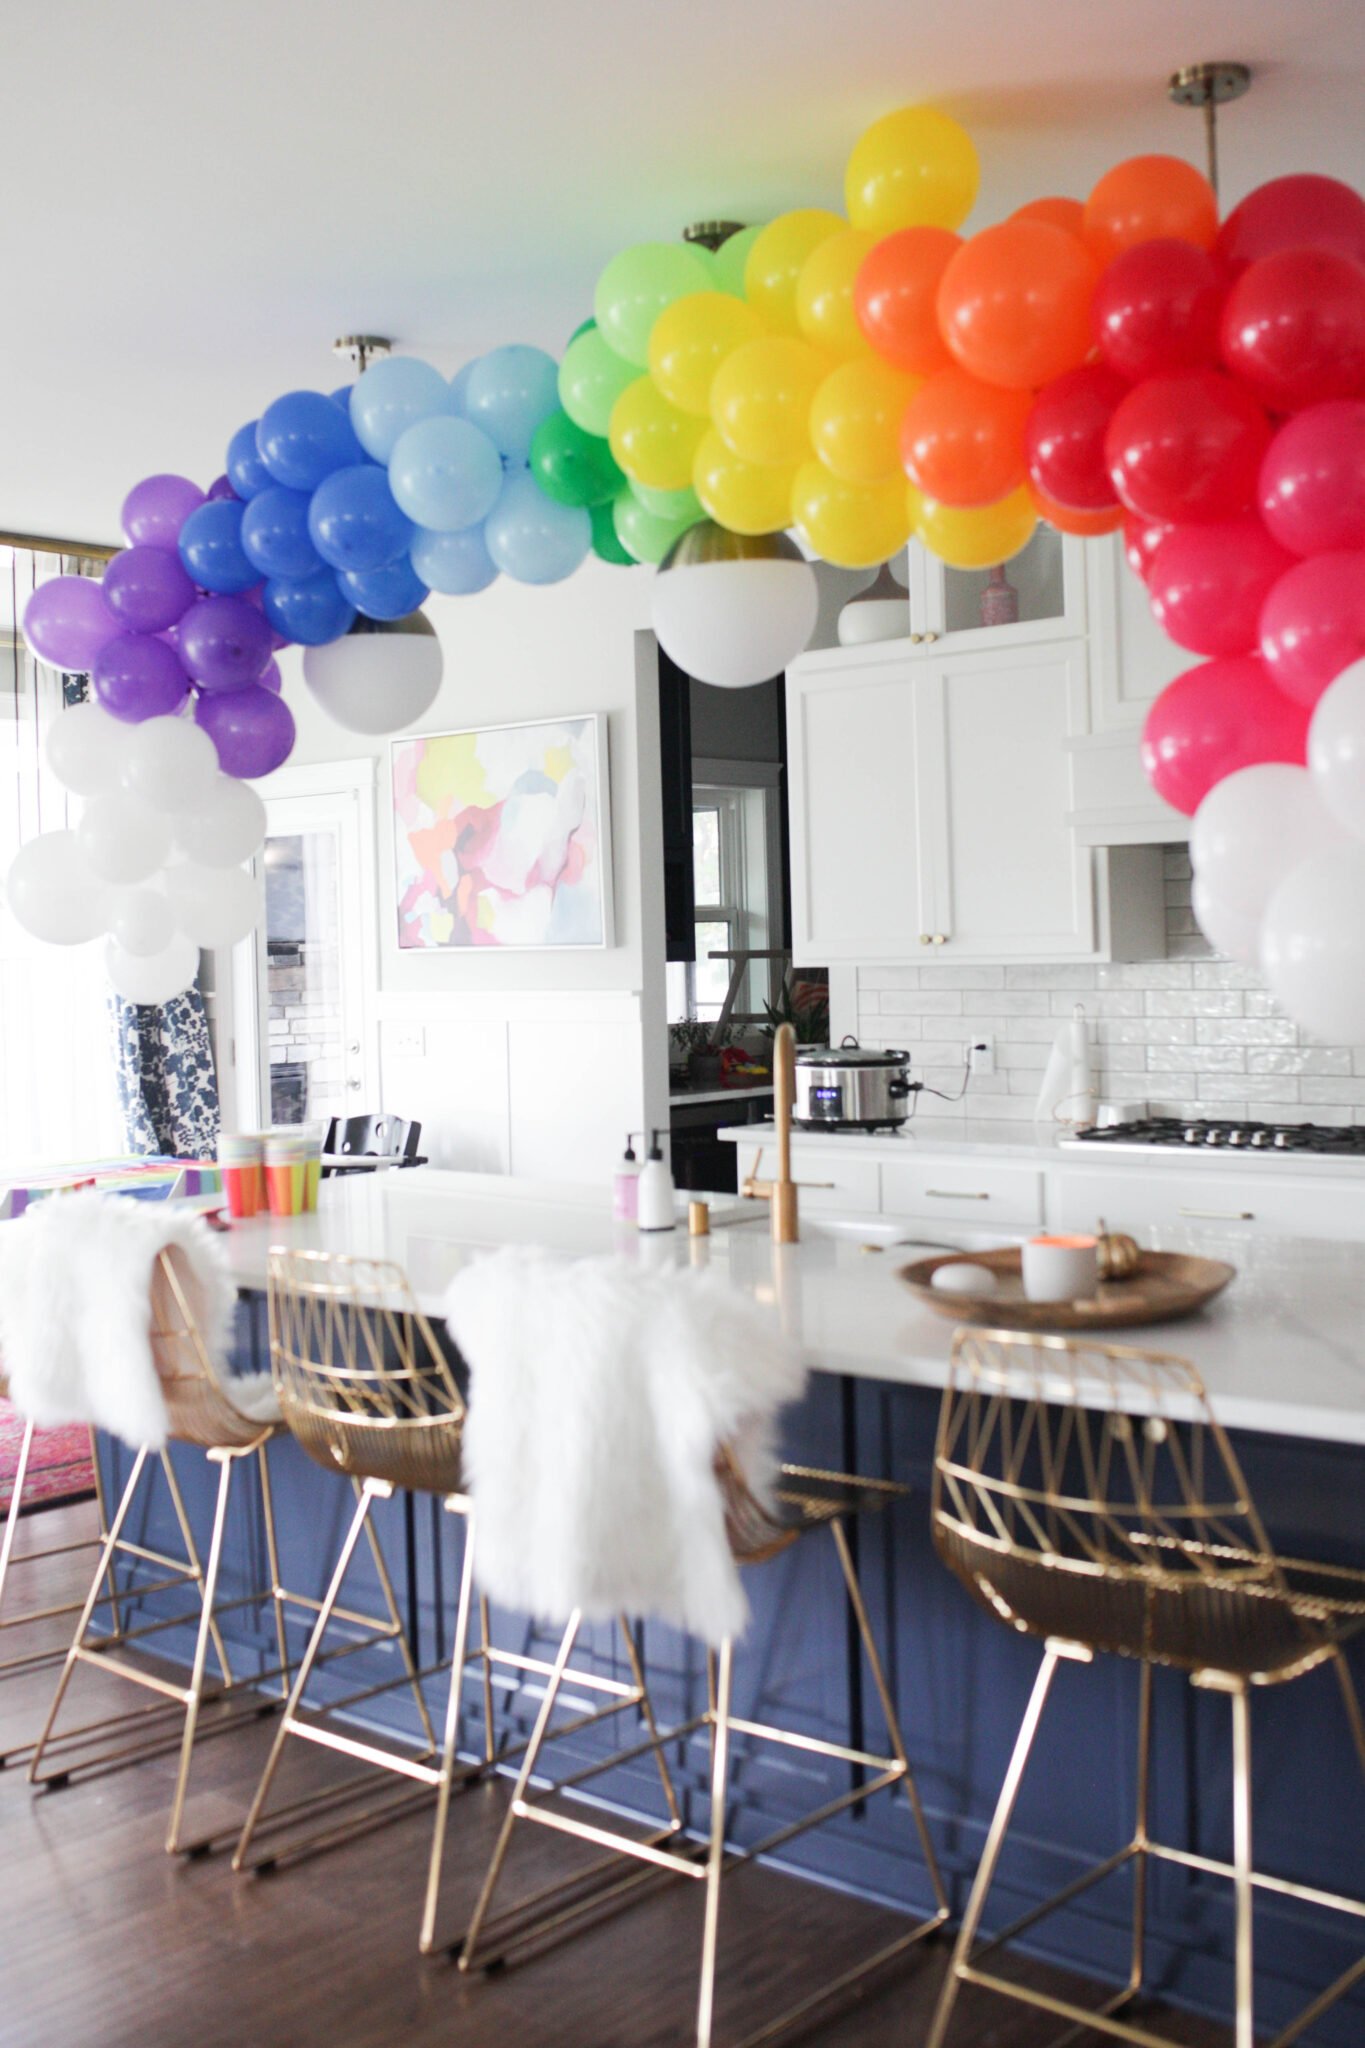 Rainbow balloon garland over kitchen island. Groups of each color with white on the ends to look like clouds